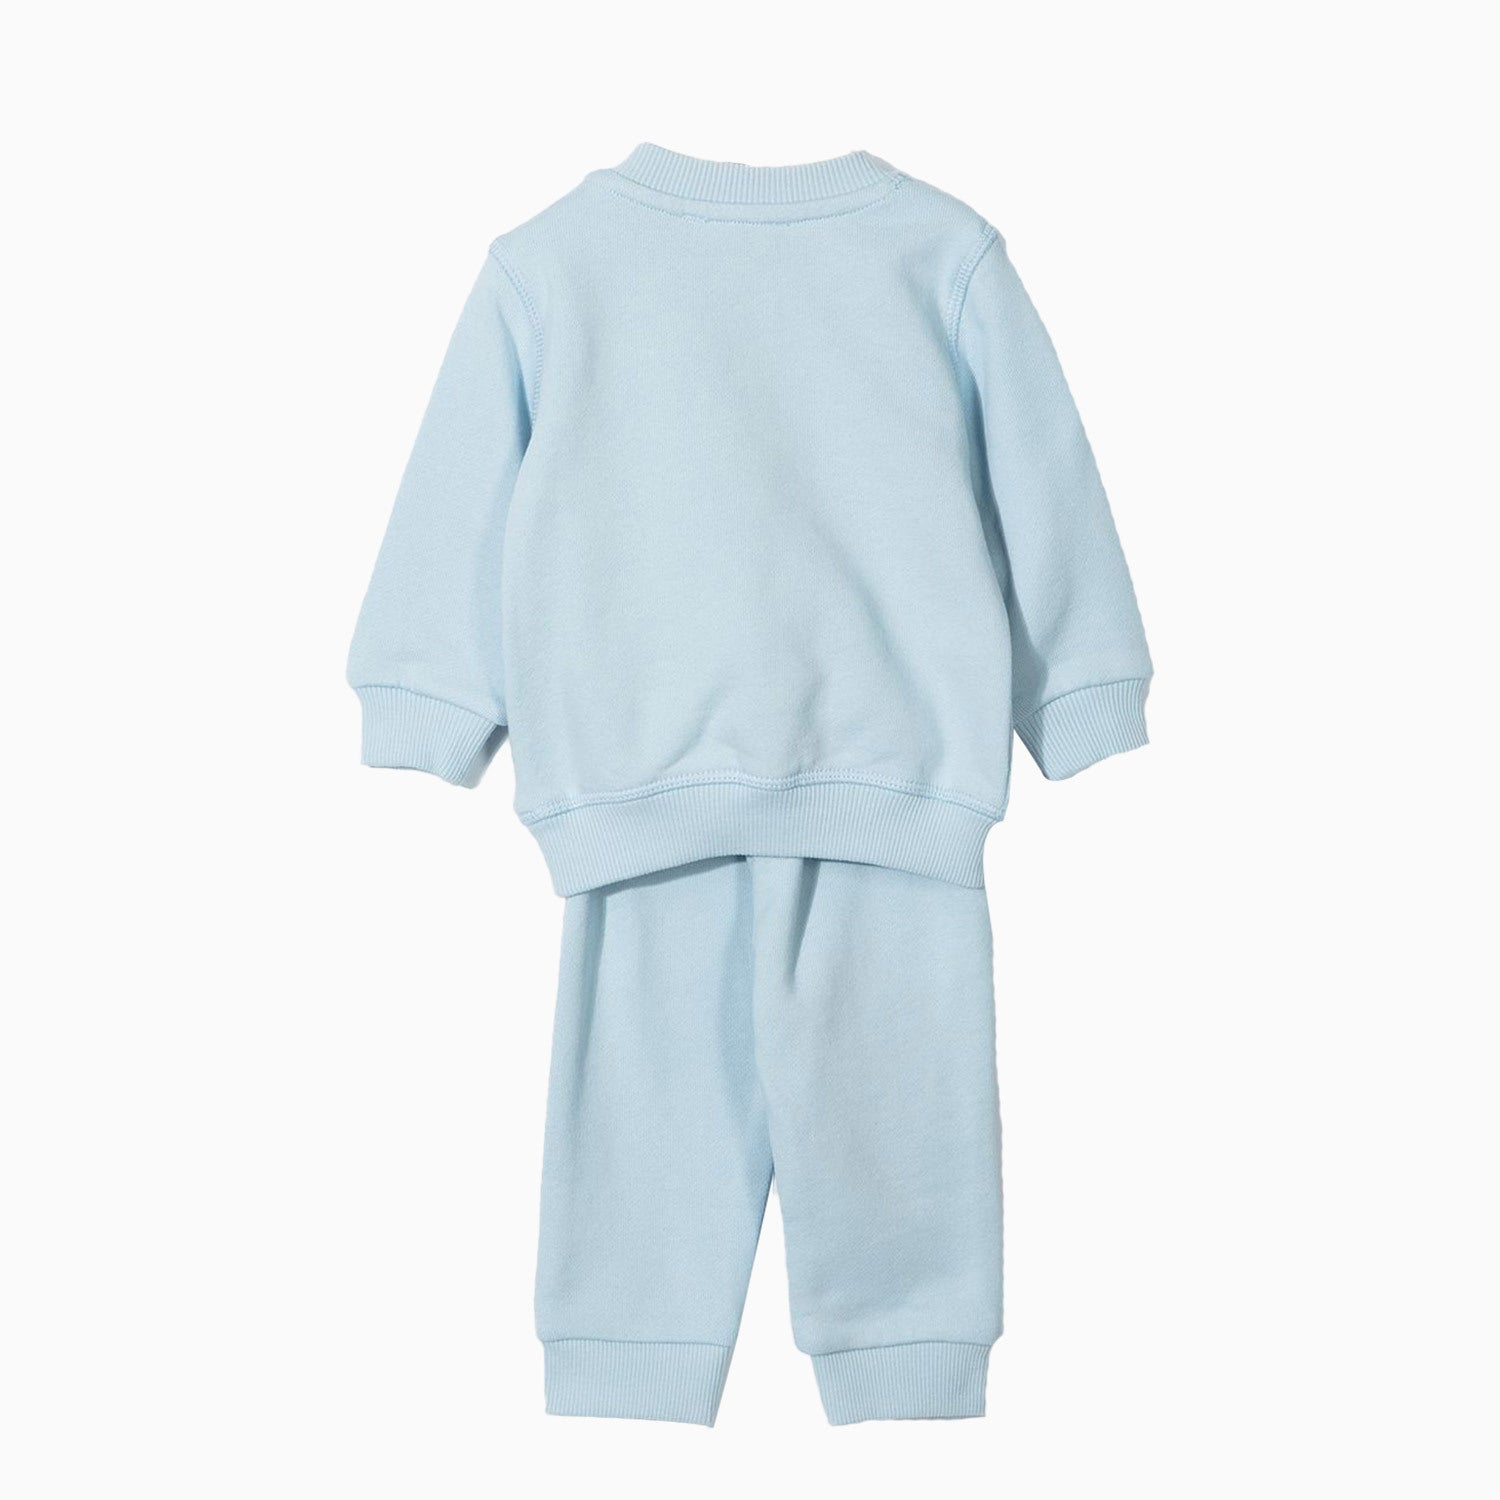 Kenzo Kid's Tiger Print Outfit - Color: Pale Blue - Kids Premium Clothing -